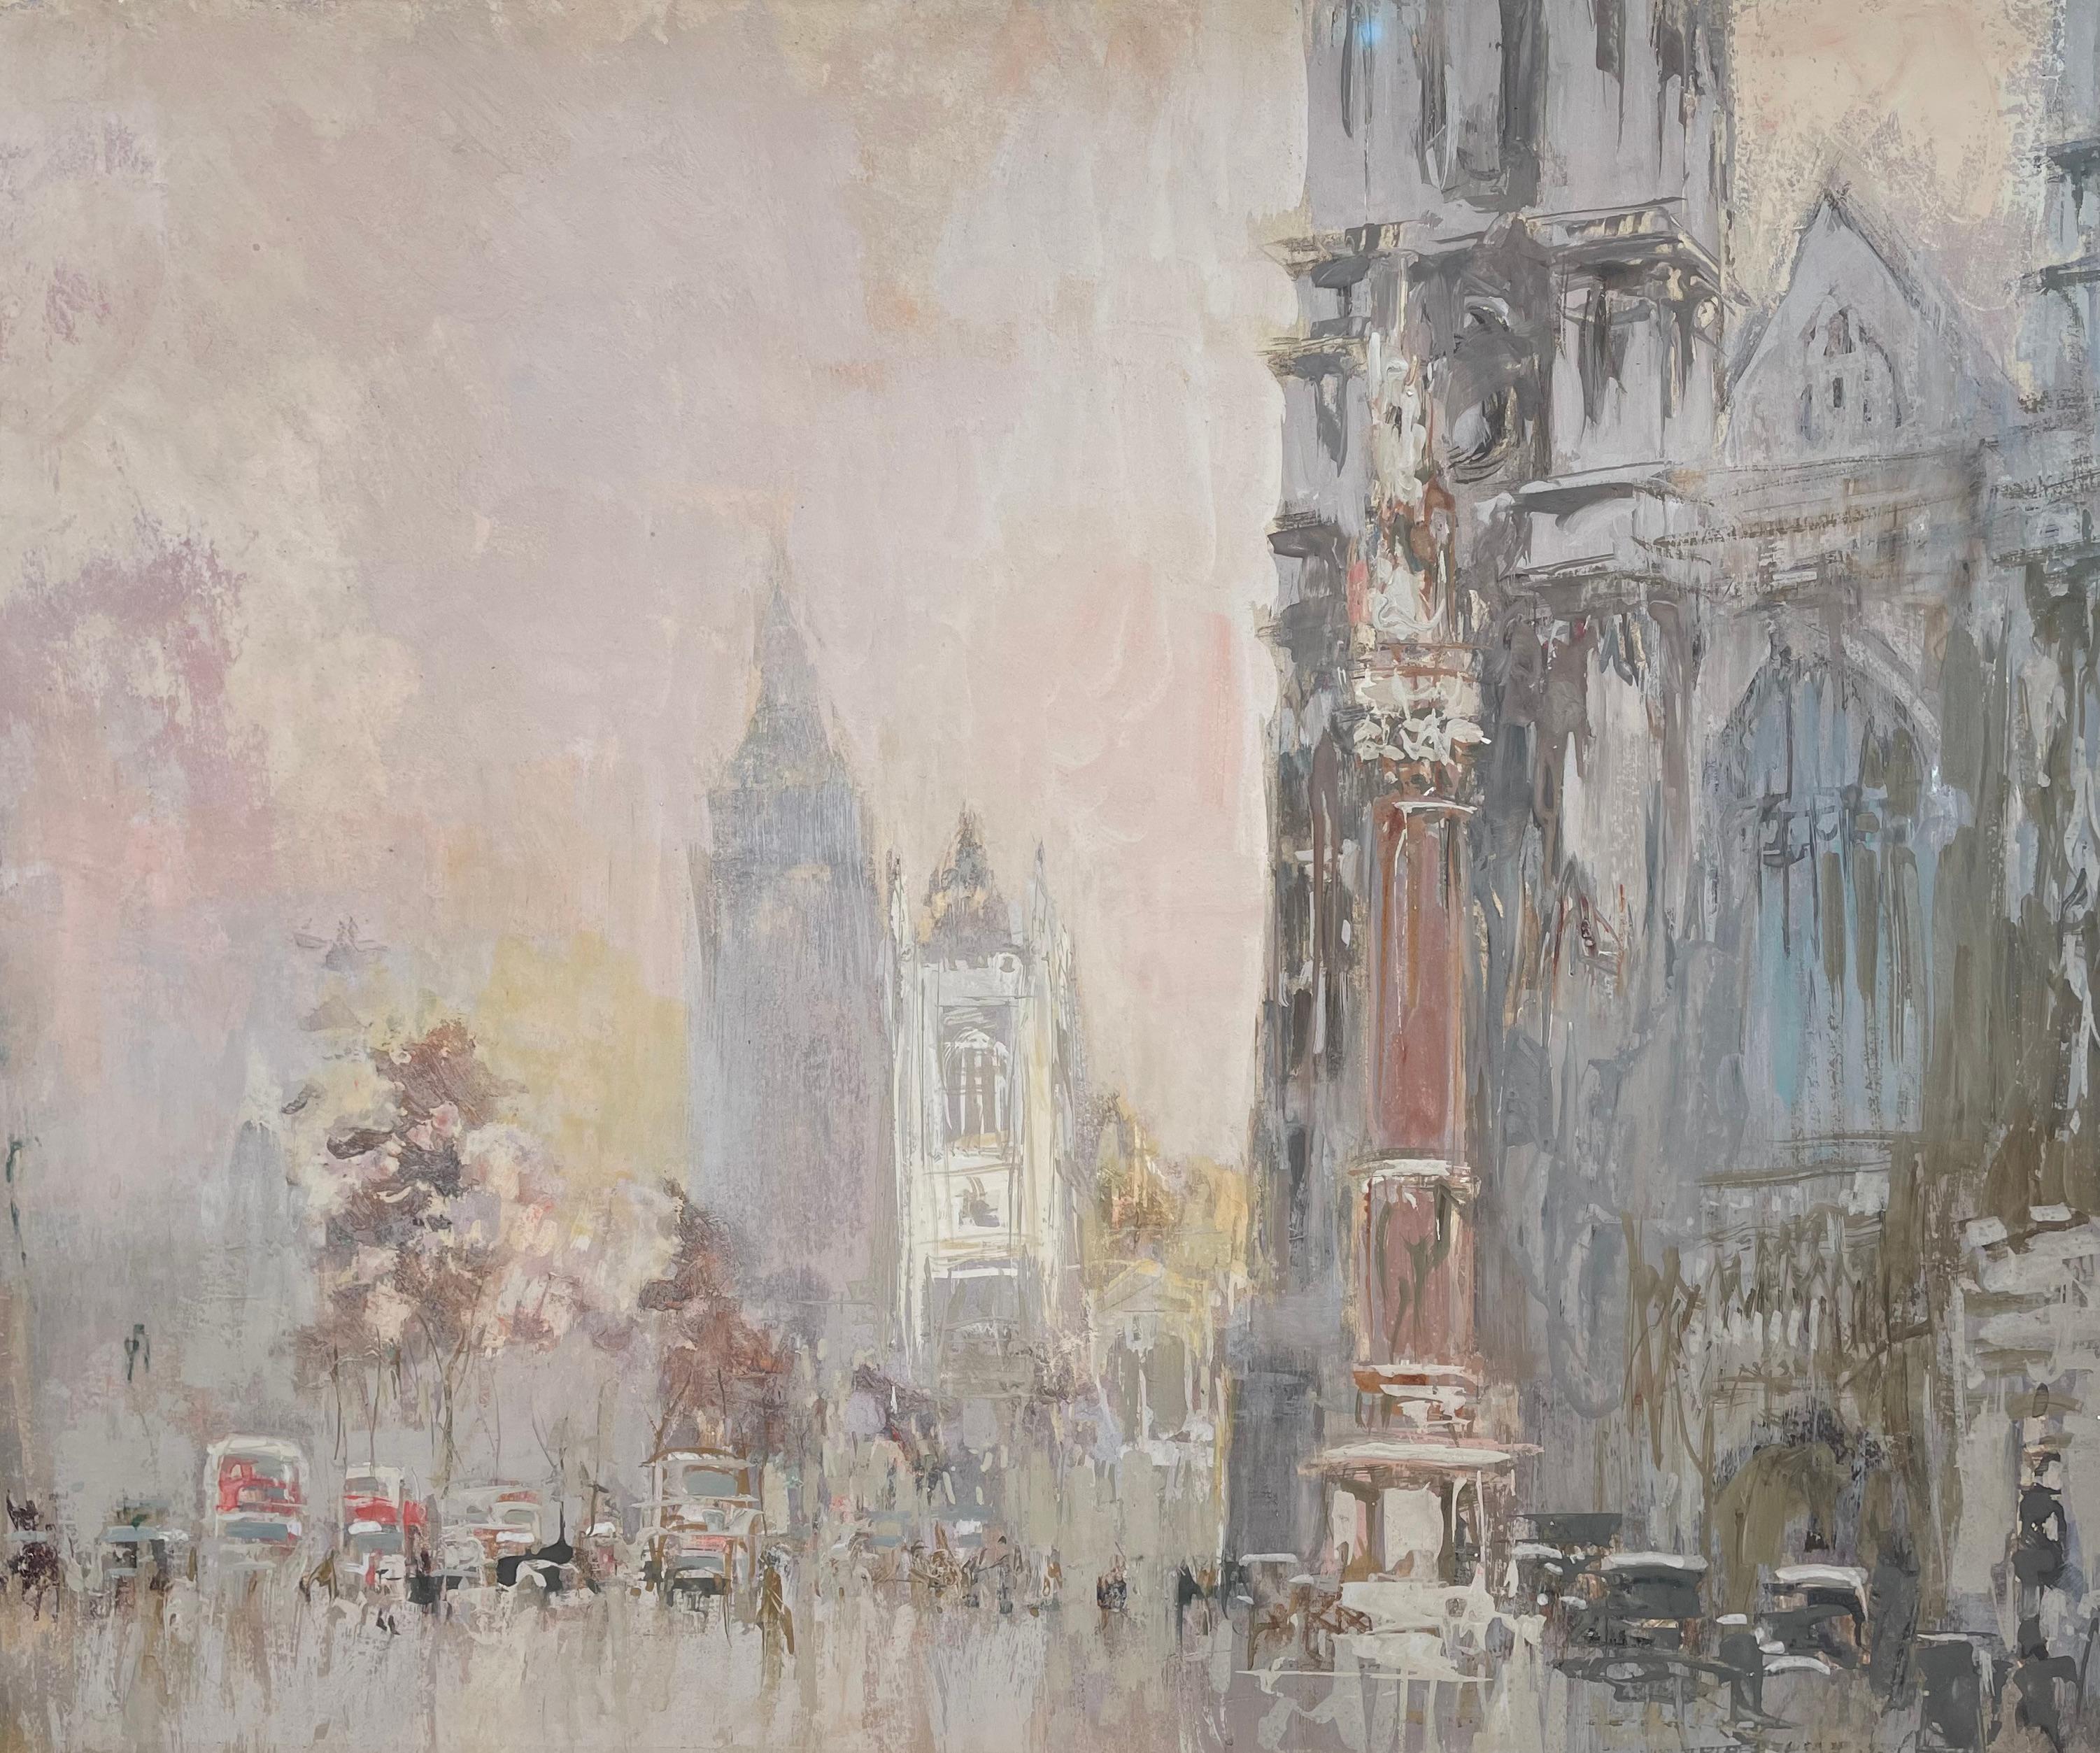 William Walcot, R.E., Hon.R.I.B.A. Landscape Art - Westminster - 20th Century British Watercolour of London by William Walcot